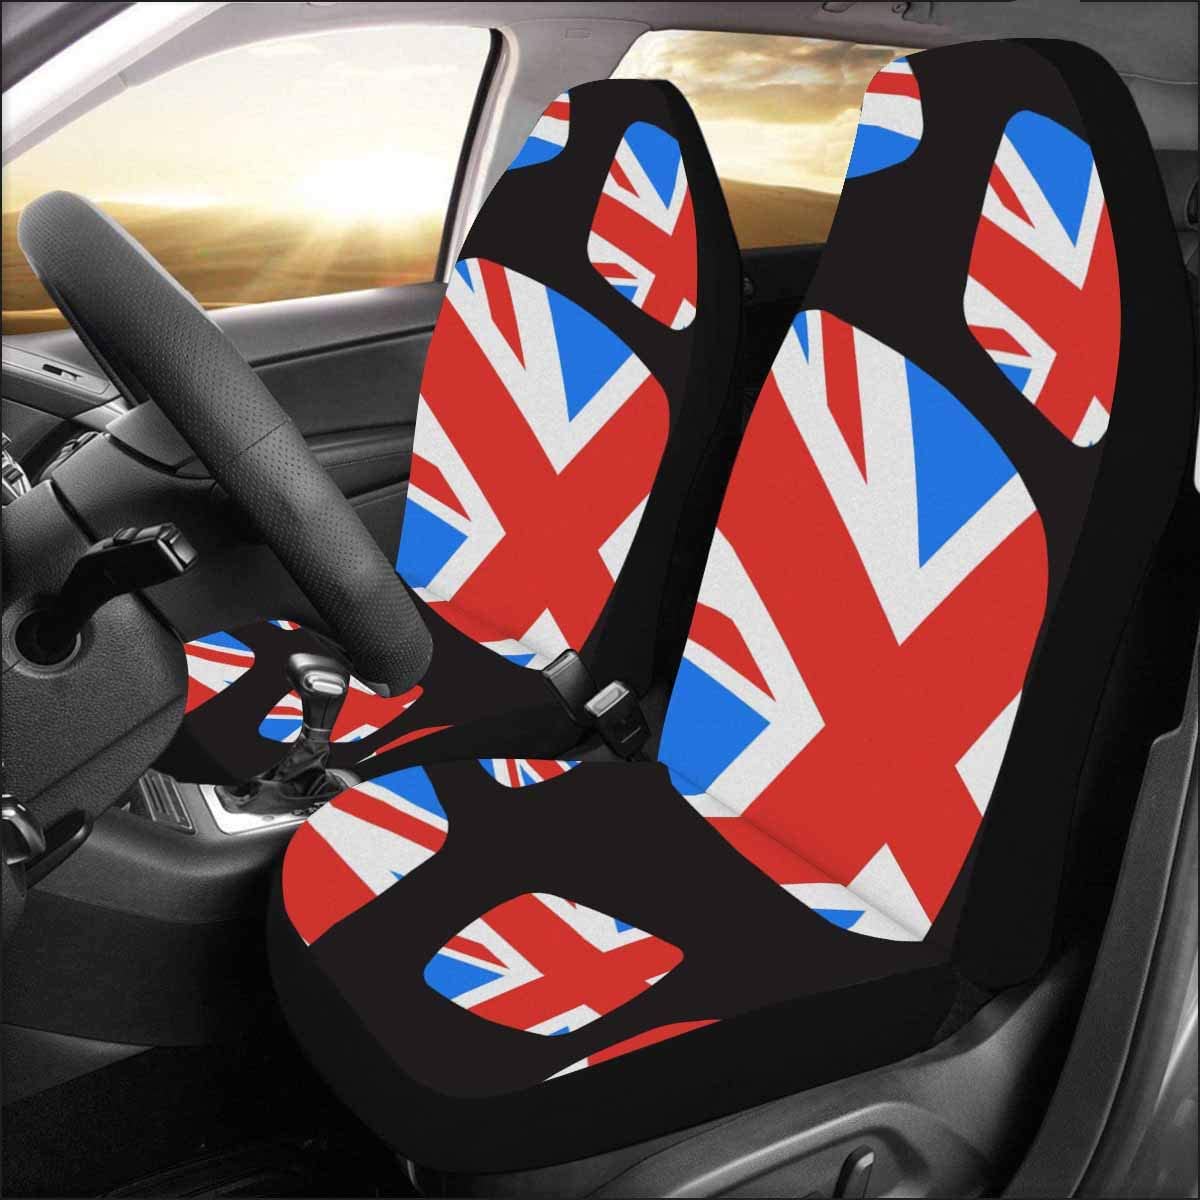 ZHANZZK Set of 2 Car Seat Covers Union Jack Flag Universal Auto Front Seats Protector Fits for Car,SUV Sedan,Truck - image 2 of 4